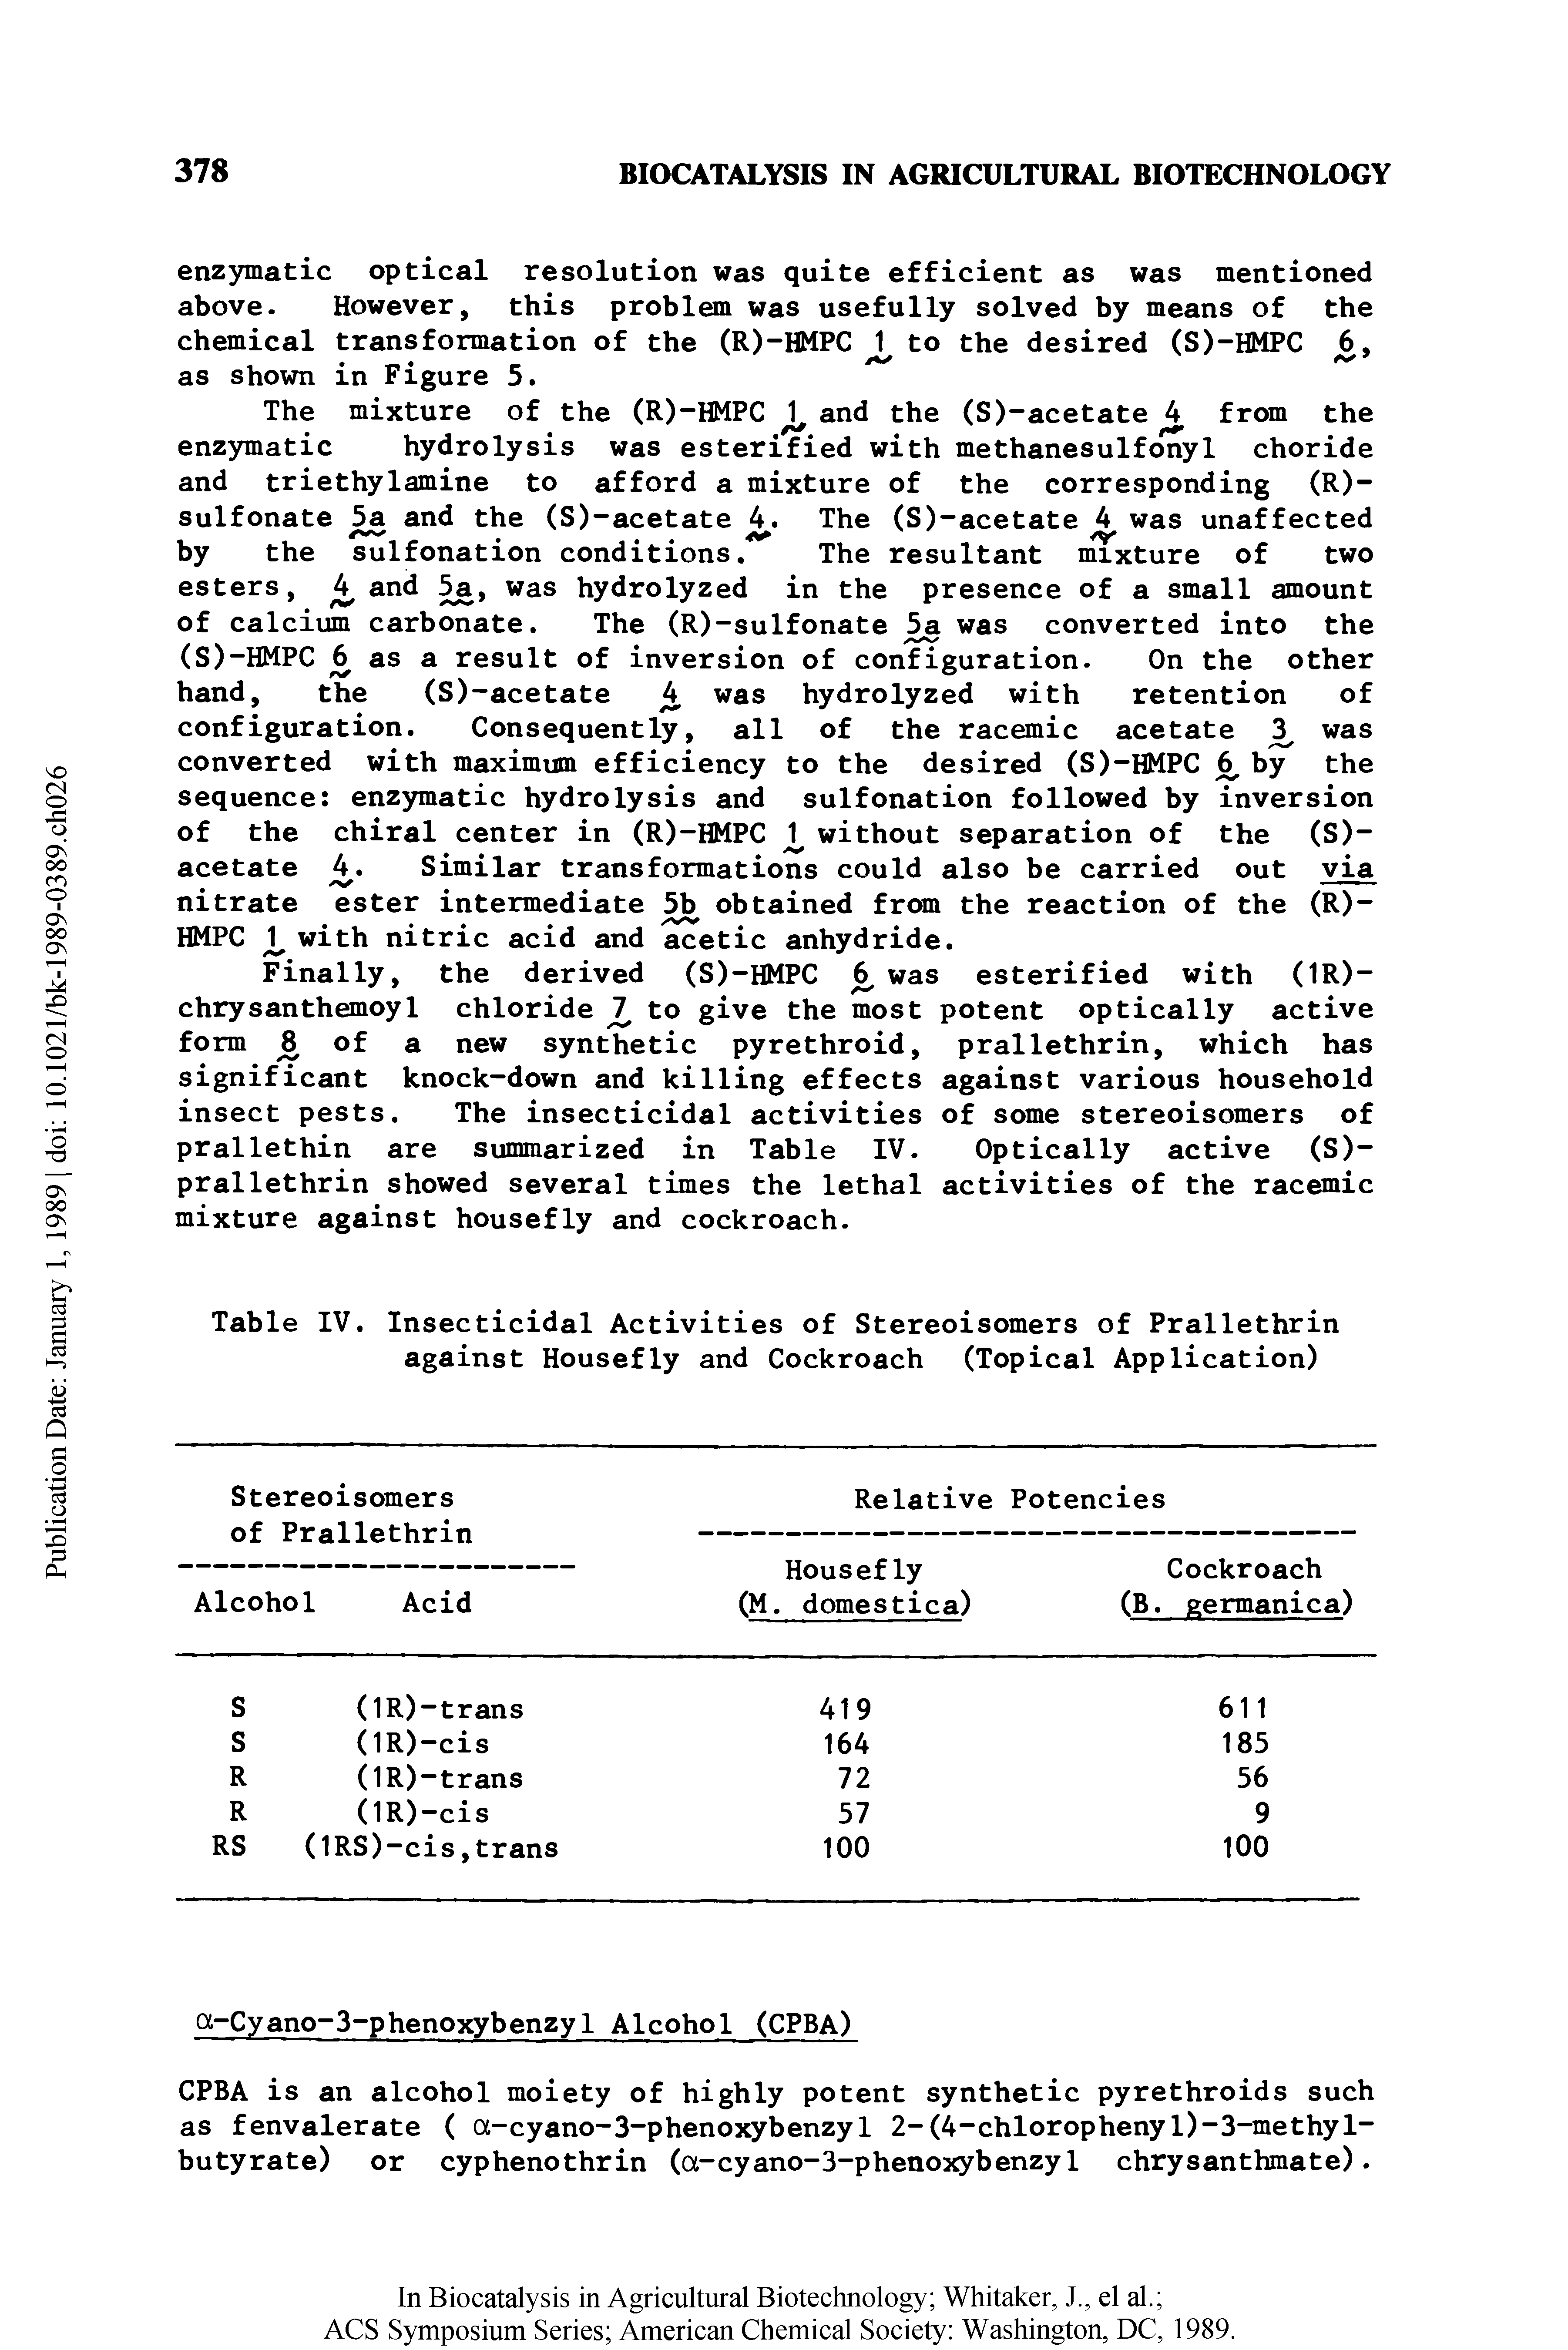 Table IV. Insecticidal Activities of Stereoisomers of Prallethrin against Housefly and Cockroach (Topical Application)...